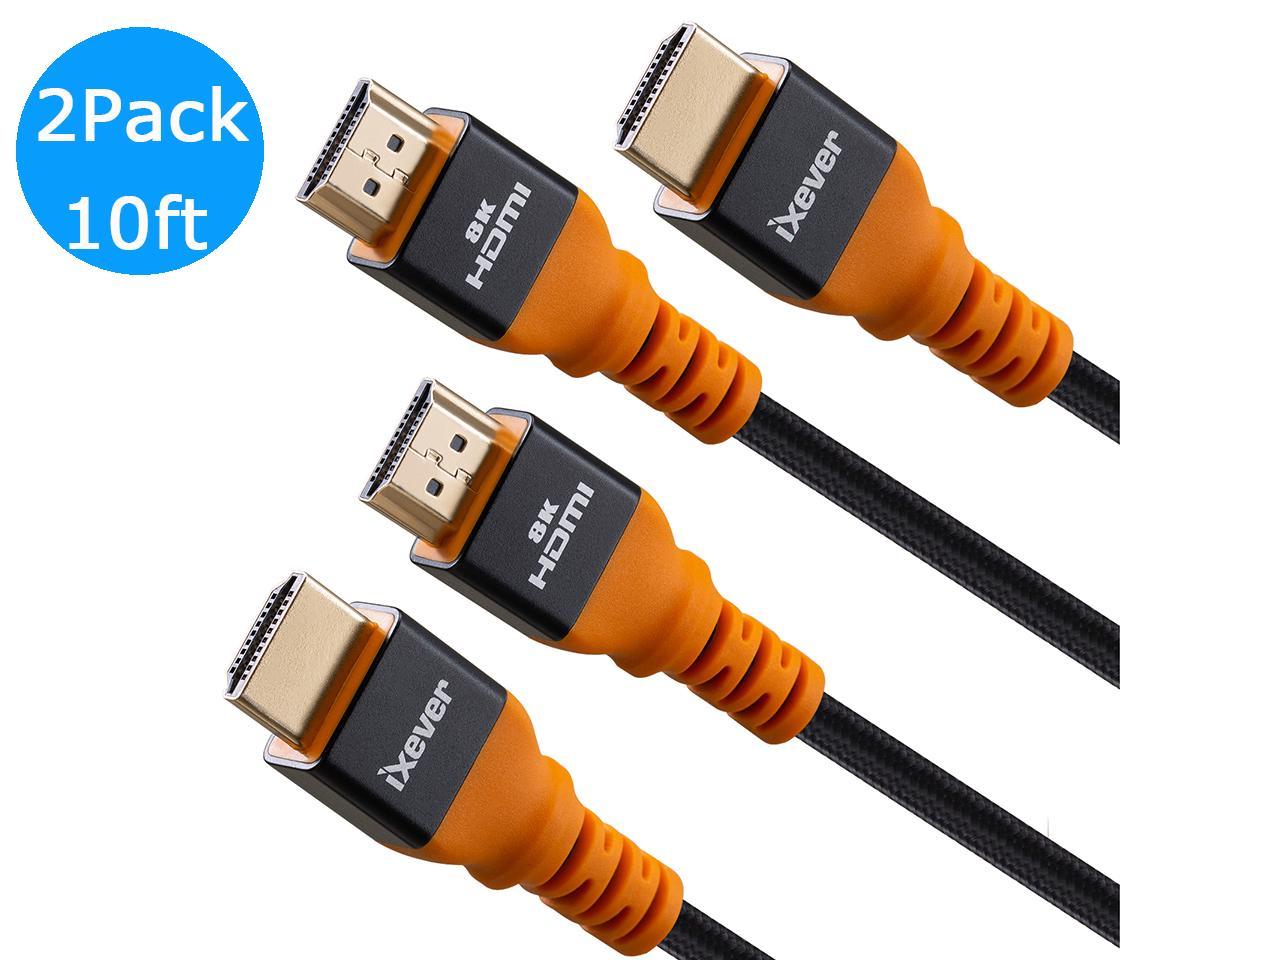 8k 60hz Hdmi Cable 10ft 2 Pack 48gbps 7680p Ultra High Speed Hdmi 2 1 Cable Cord For Apple Tv Roku Samsung Qled Sony Lg Playstation Ps5 Ps4 Xbox One Series X Hdmi 2 0 4k 120hz Compatible Newegg Com